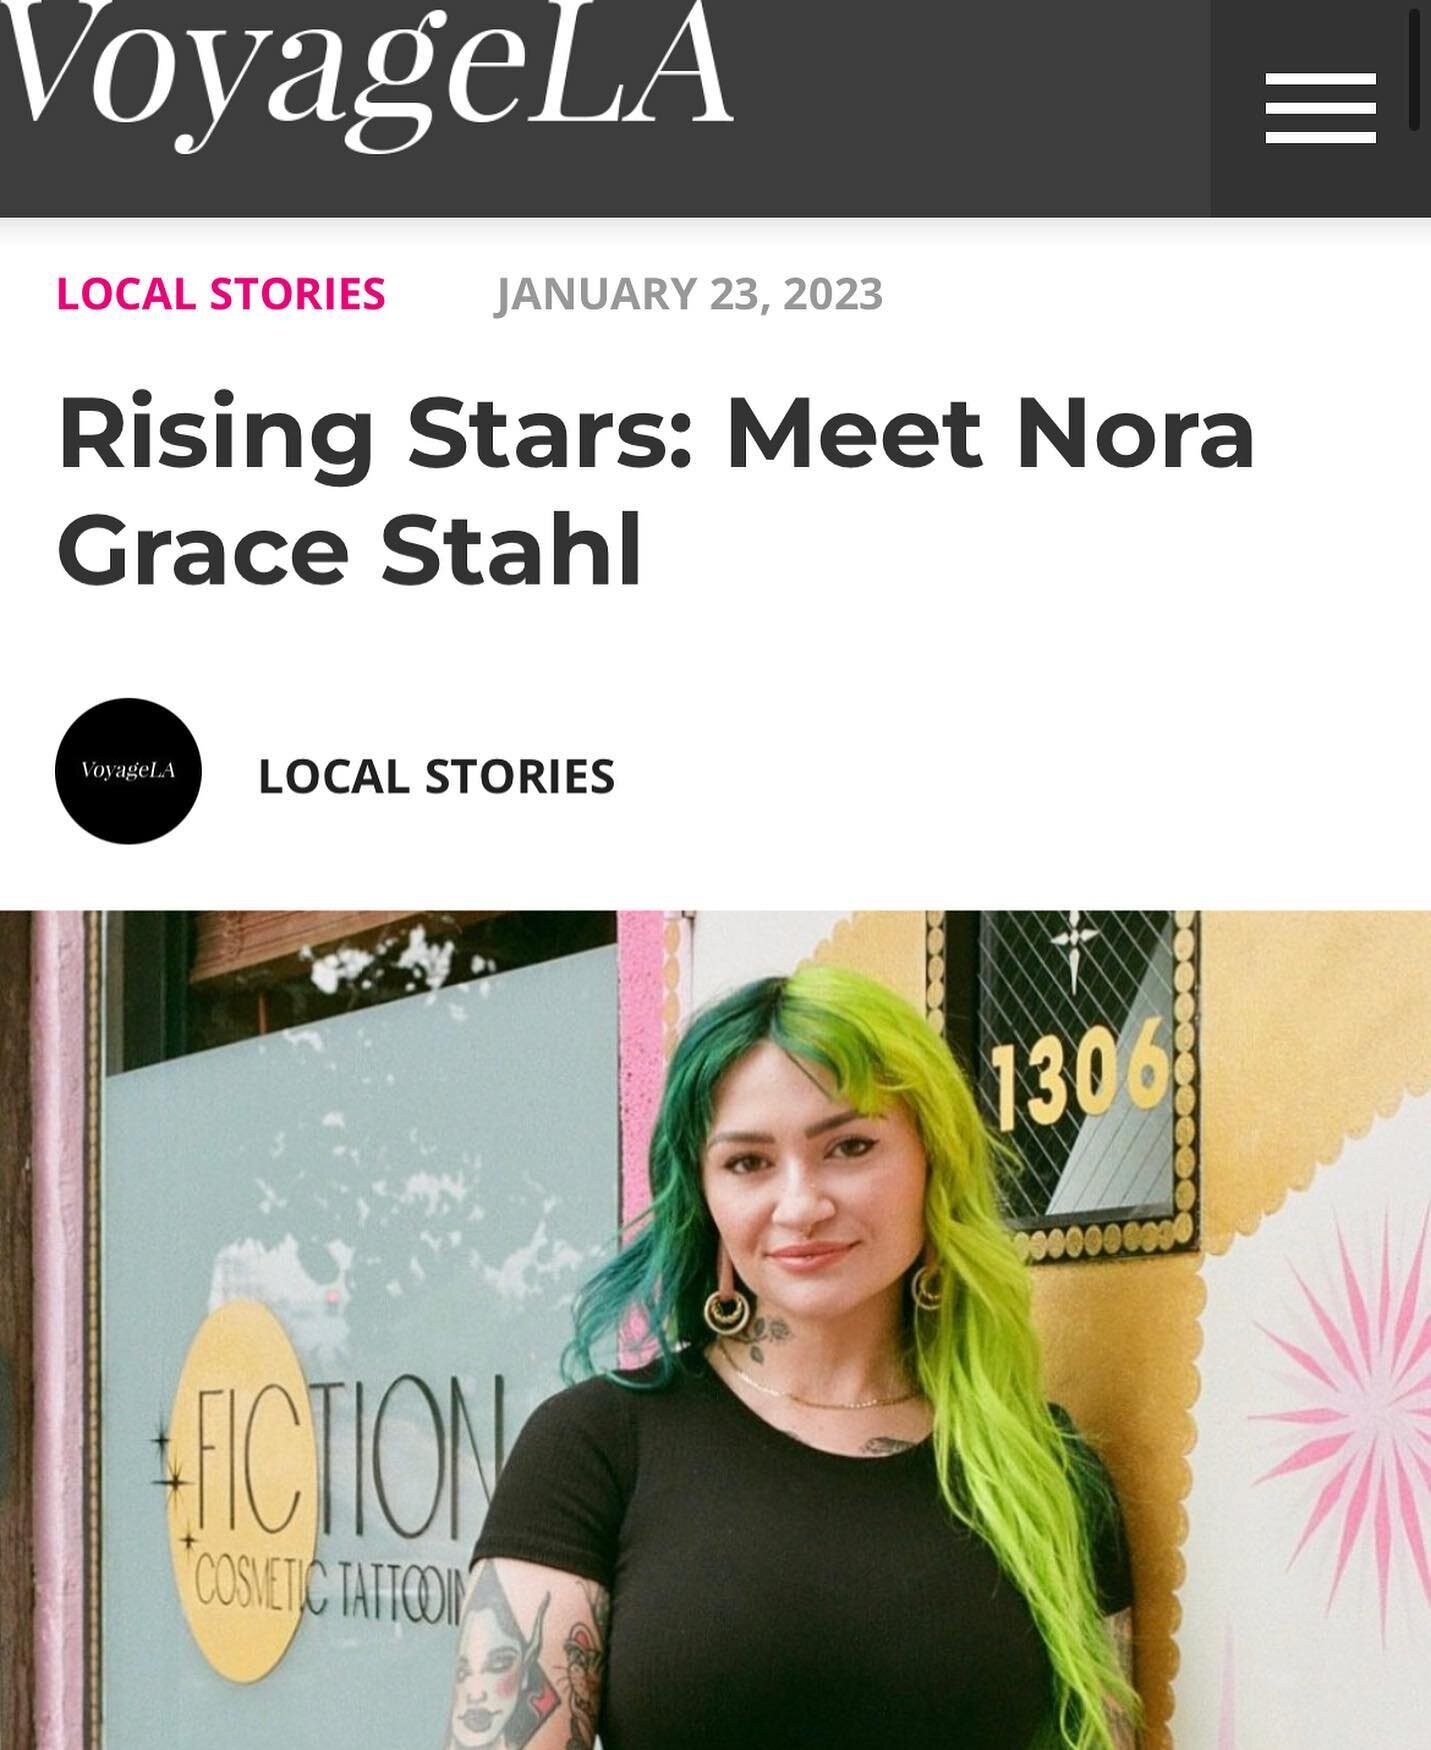 Thank you @voyagelamag for the interview! 🥲💓 Link in my story to check it out 🍒